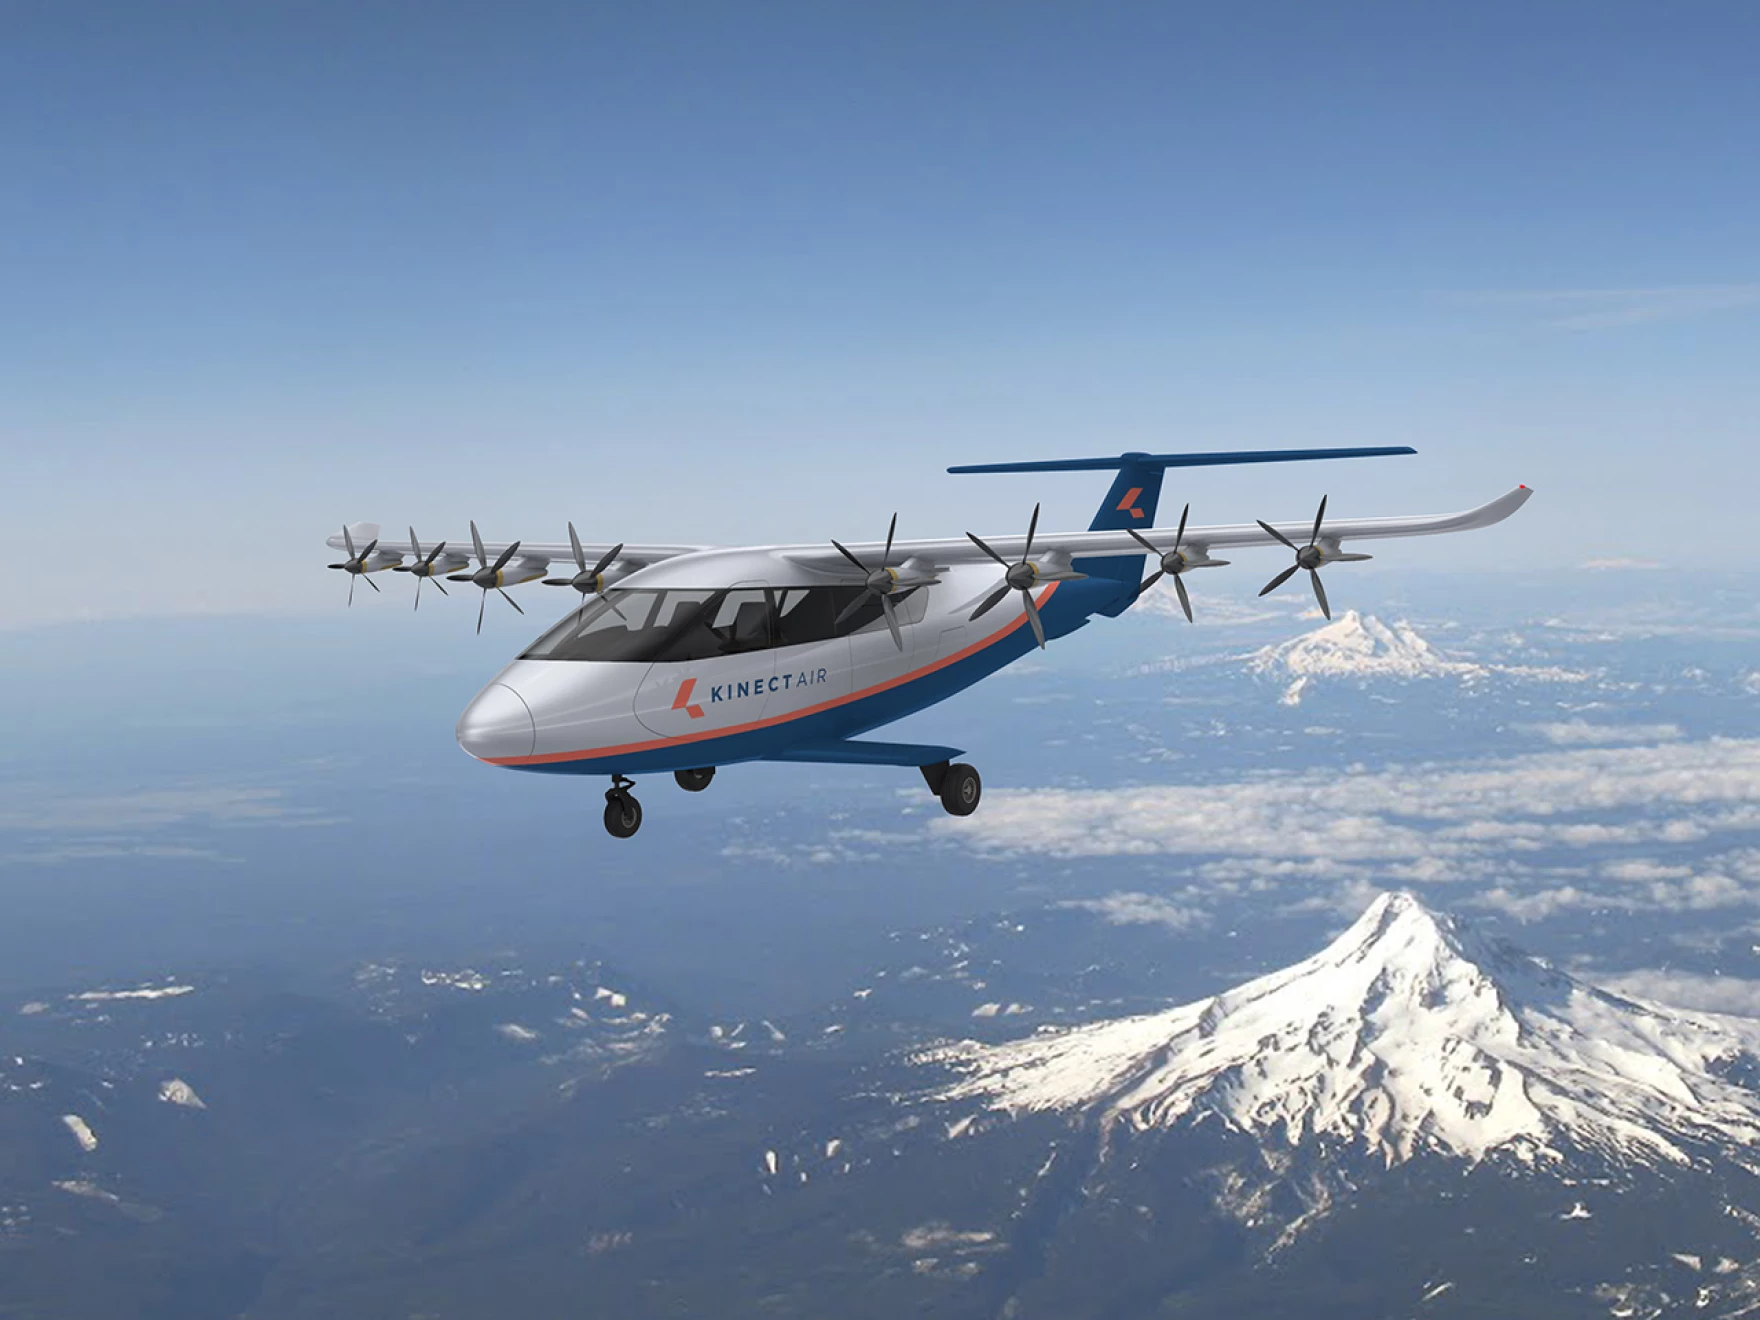 Electra.aero is developing a hybrid-electric aircraft designed to carry two pilots and nine passengers over a distance of 400 miles. KinectAir has pre-ordered the model for use on Pacific Northwest routes